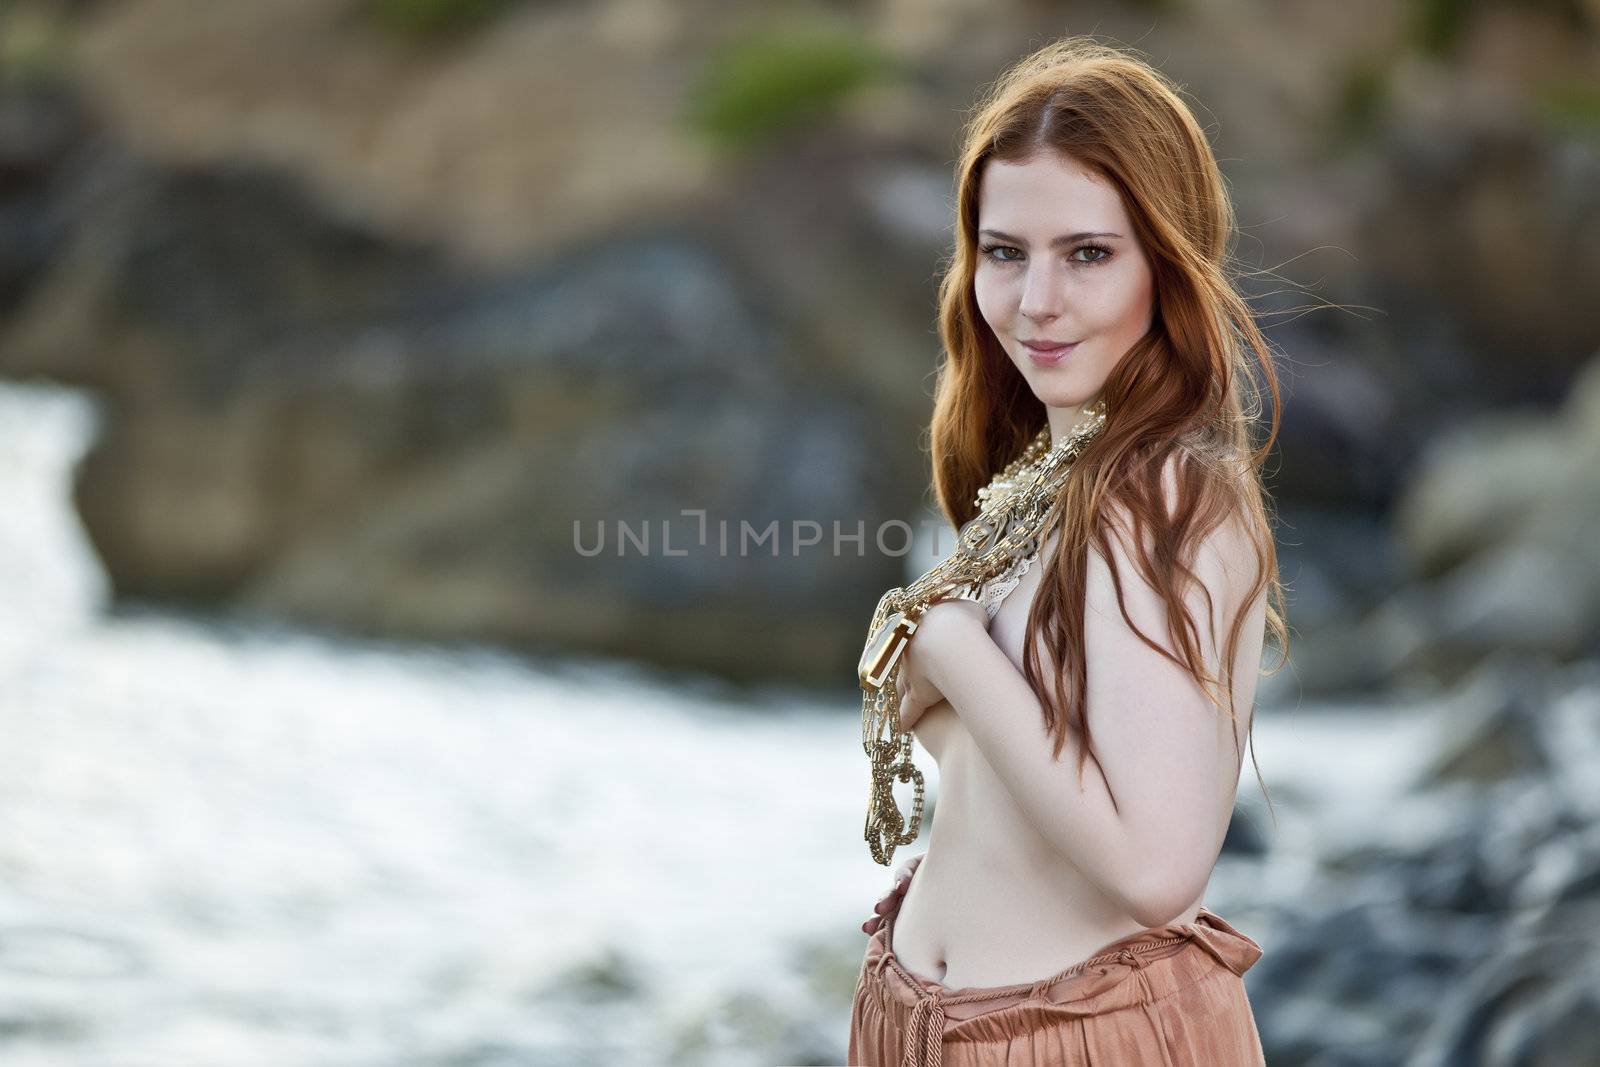 Beautiful woman with pale skin and long red hair wearing Bohemian jewellery and posing semi-nude on a beach